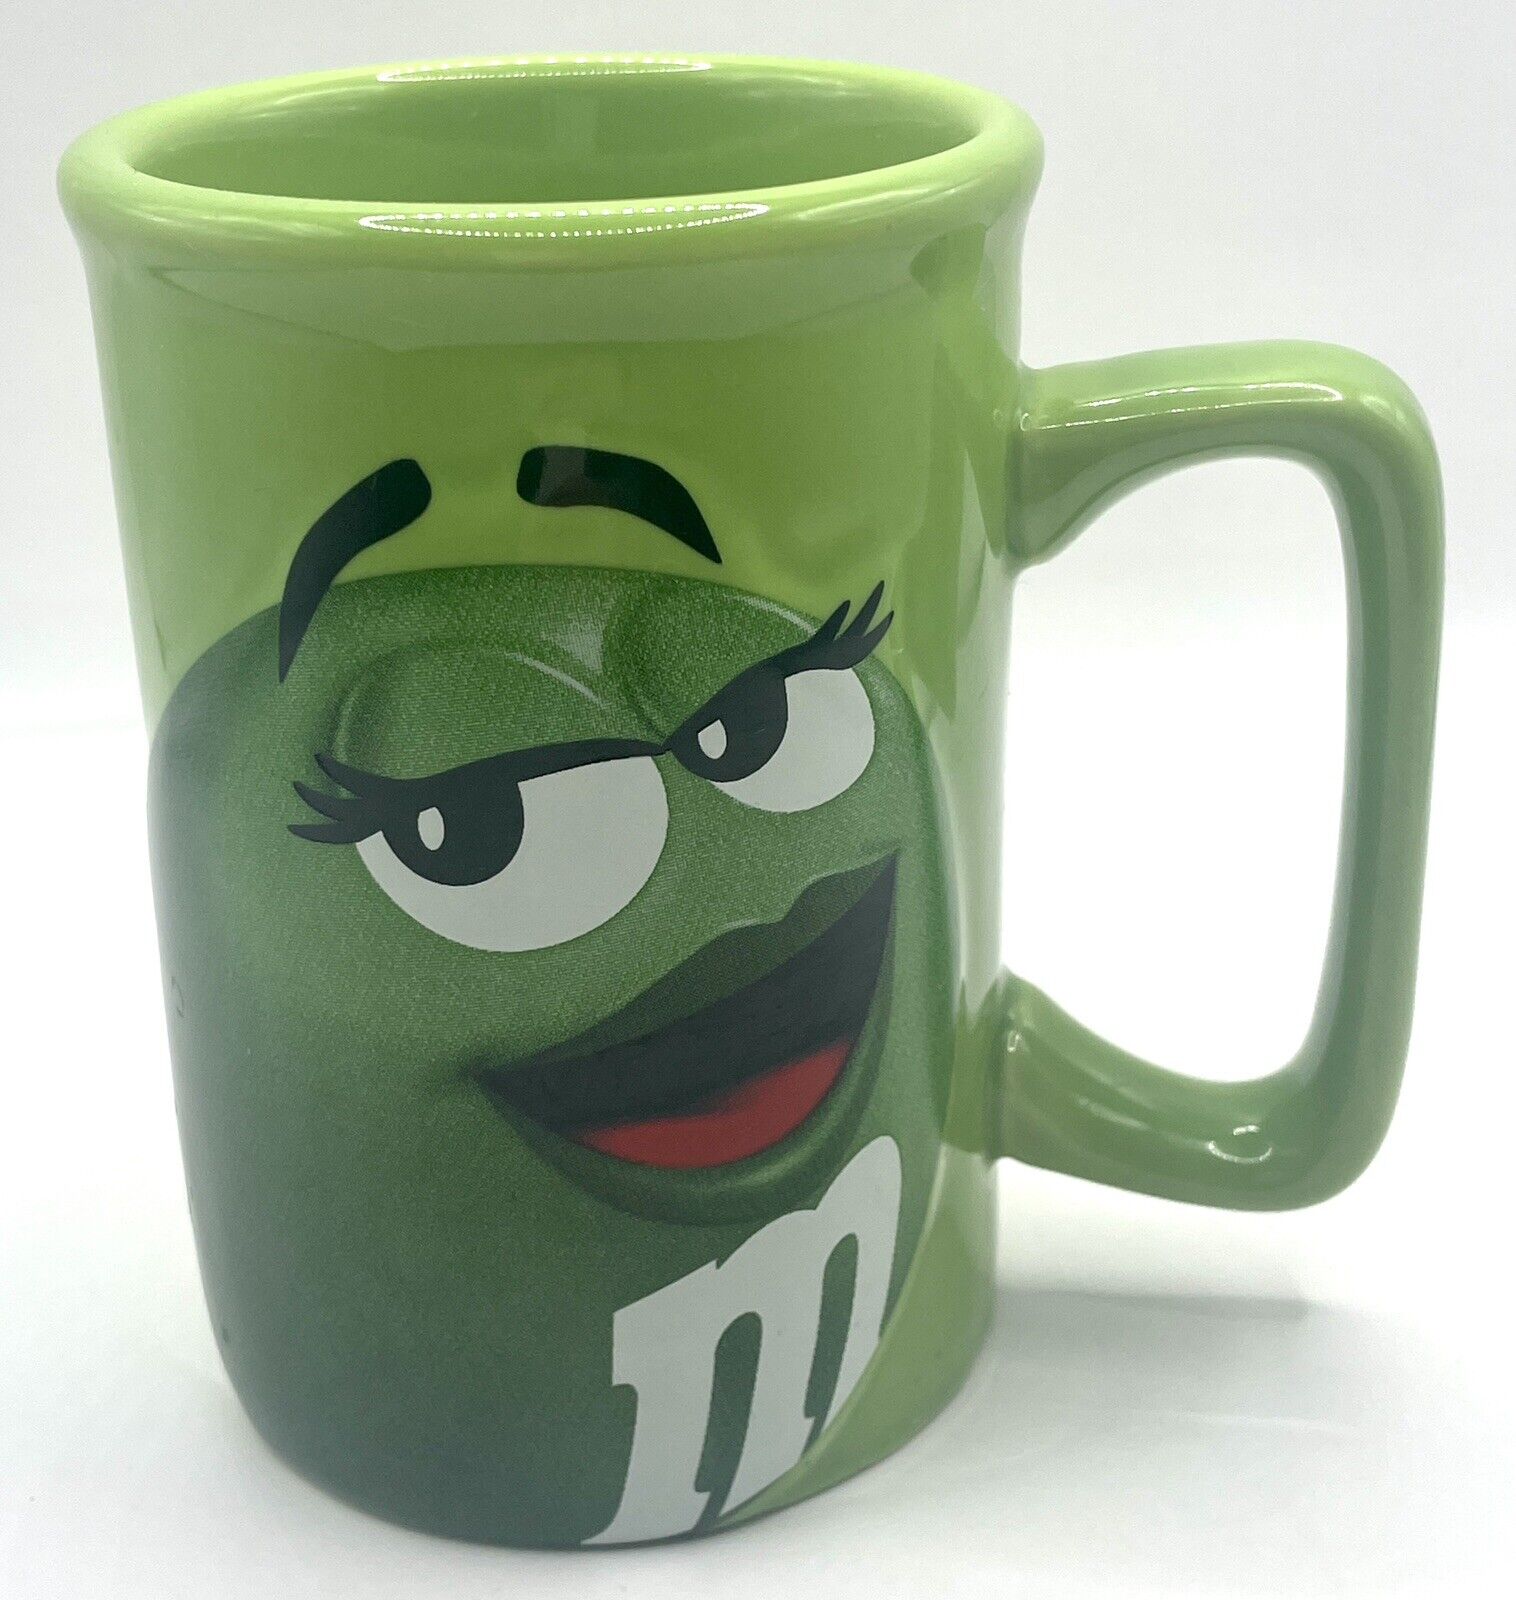 M&M Mug Green Character Ceramic Coffee Cup 2010 Official